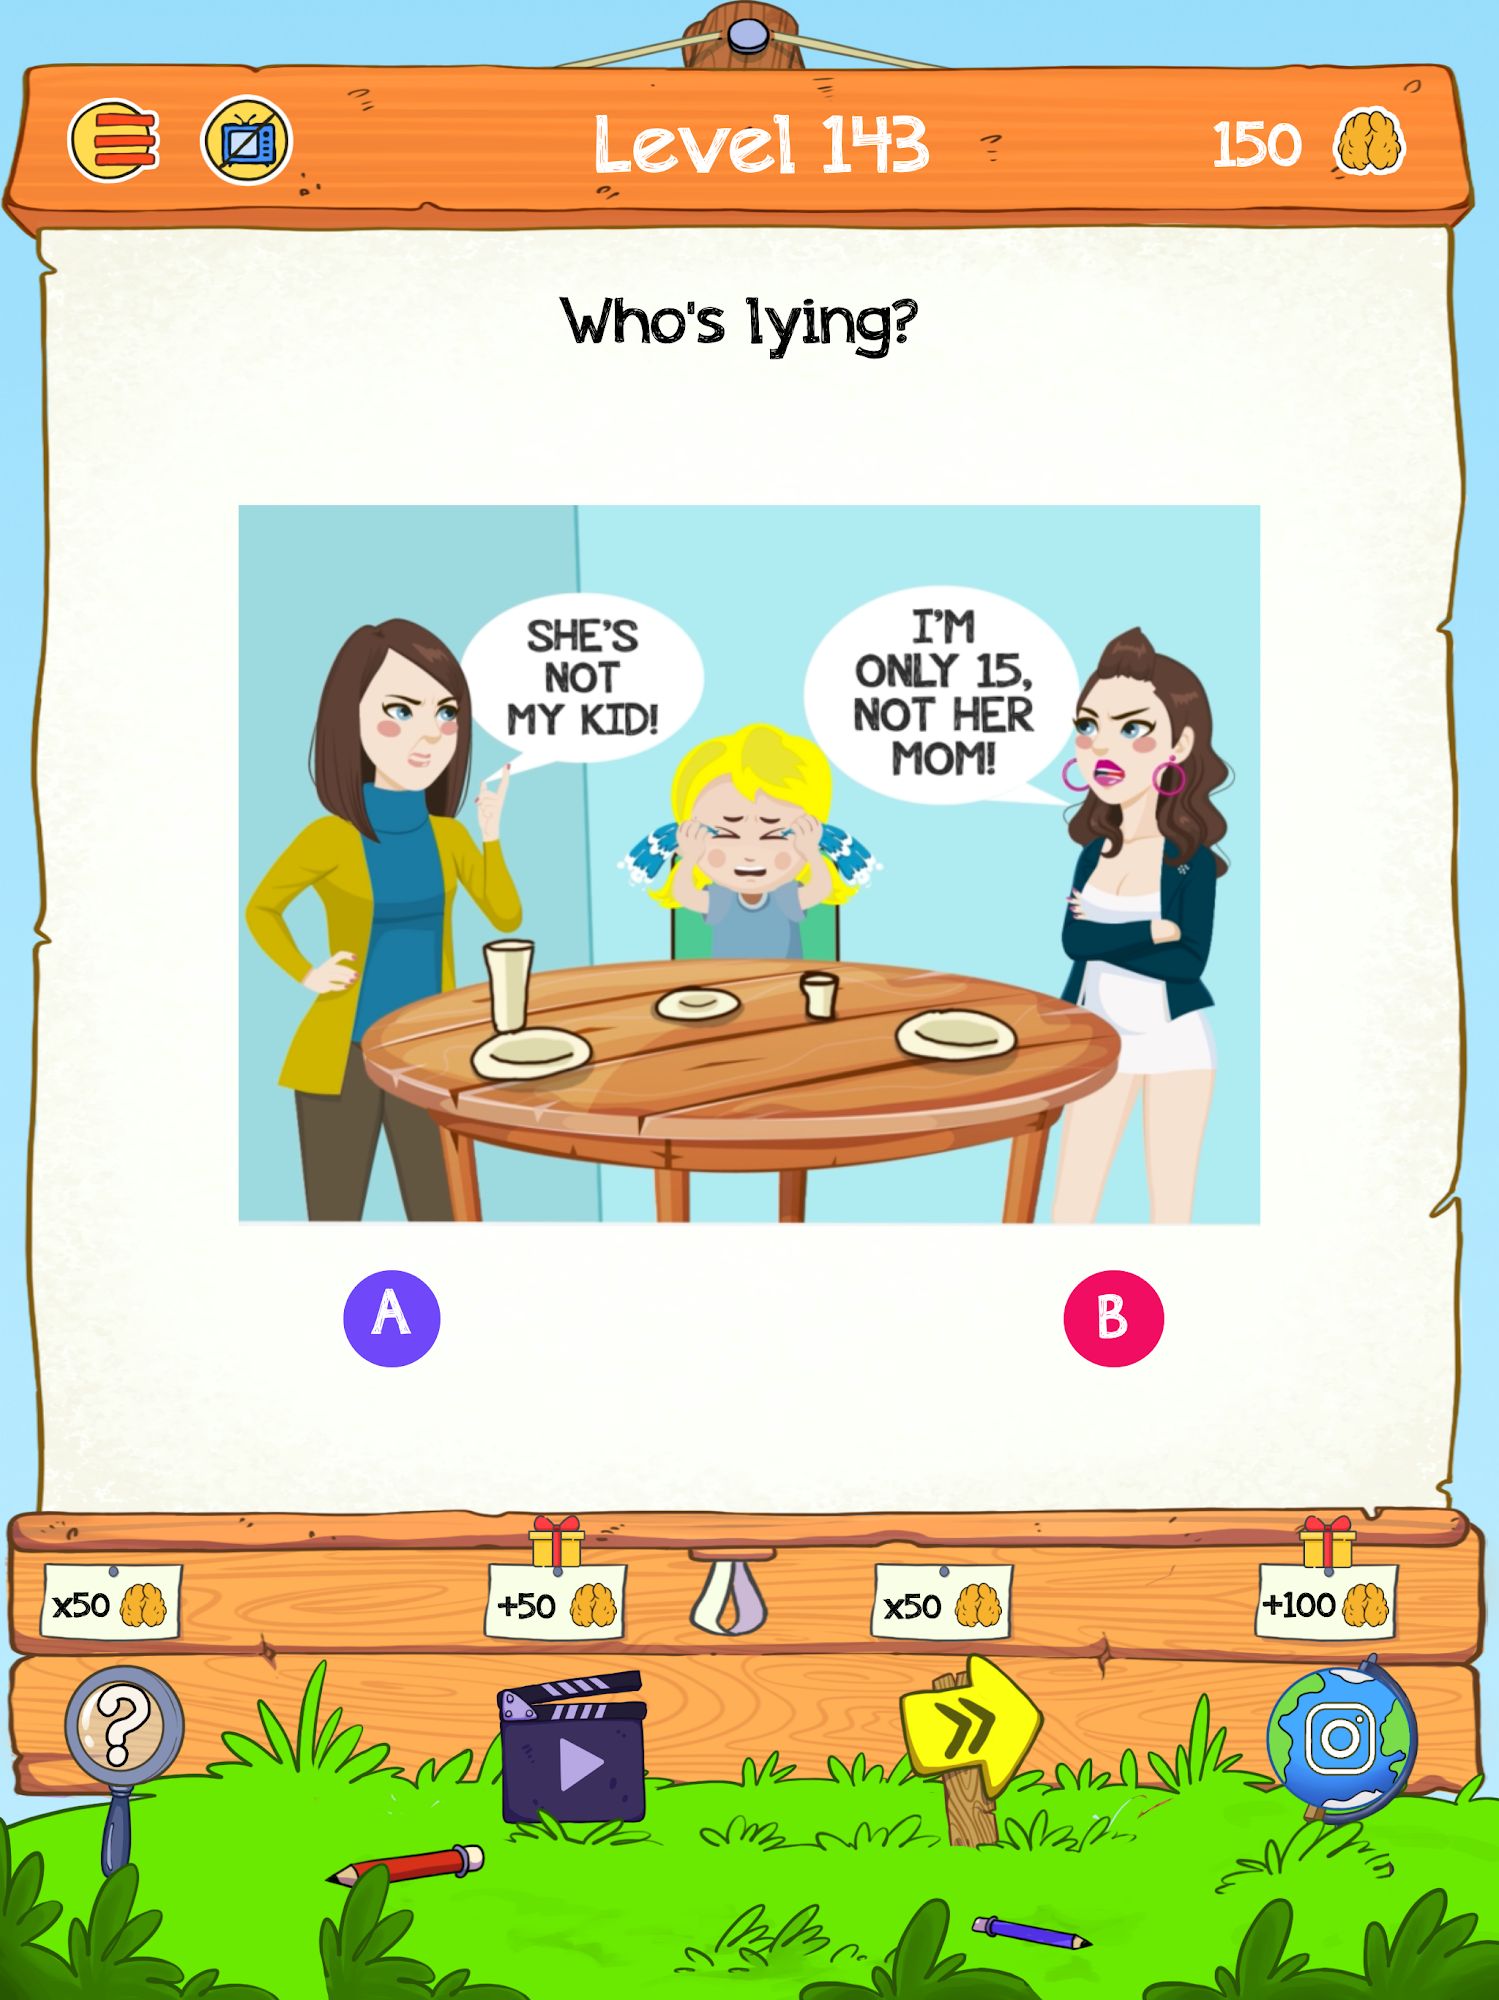 Braindom 2: Who is Lying? Fun Brain Teaser Riddles for Android